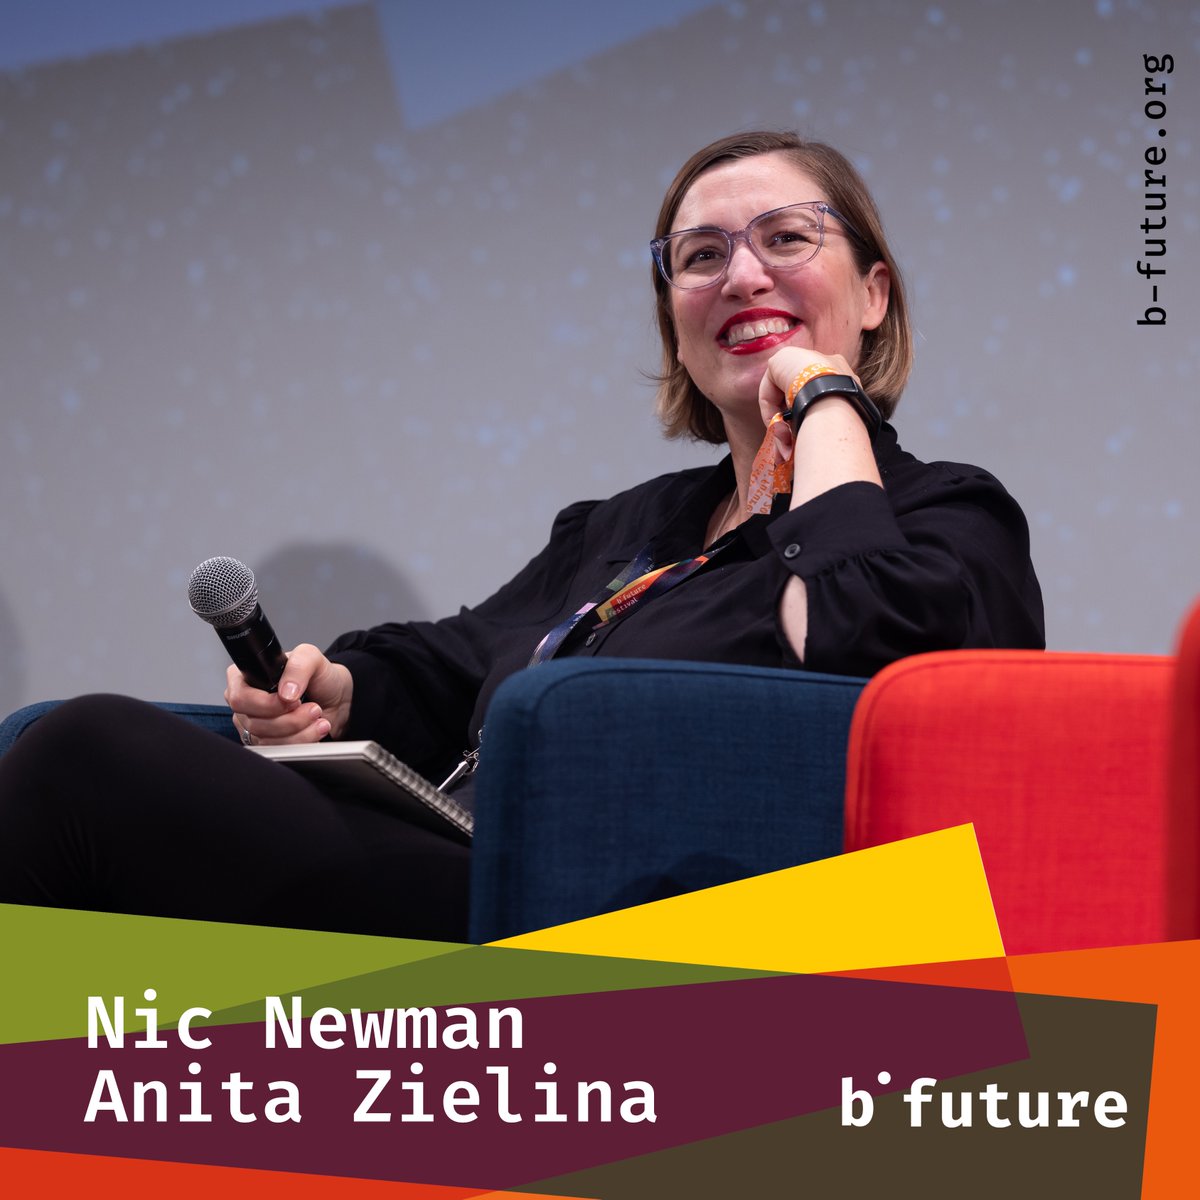 What’s behind news fatigue, and what can we do about it? @nicnewman and @Zielina delved into this insightful discussion during their fireside chat at #bff23. We'll be sharing a video of the session on YouTube soon – highly recommended: youtube.com/@bfuturefestiv… 🔥